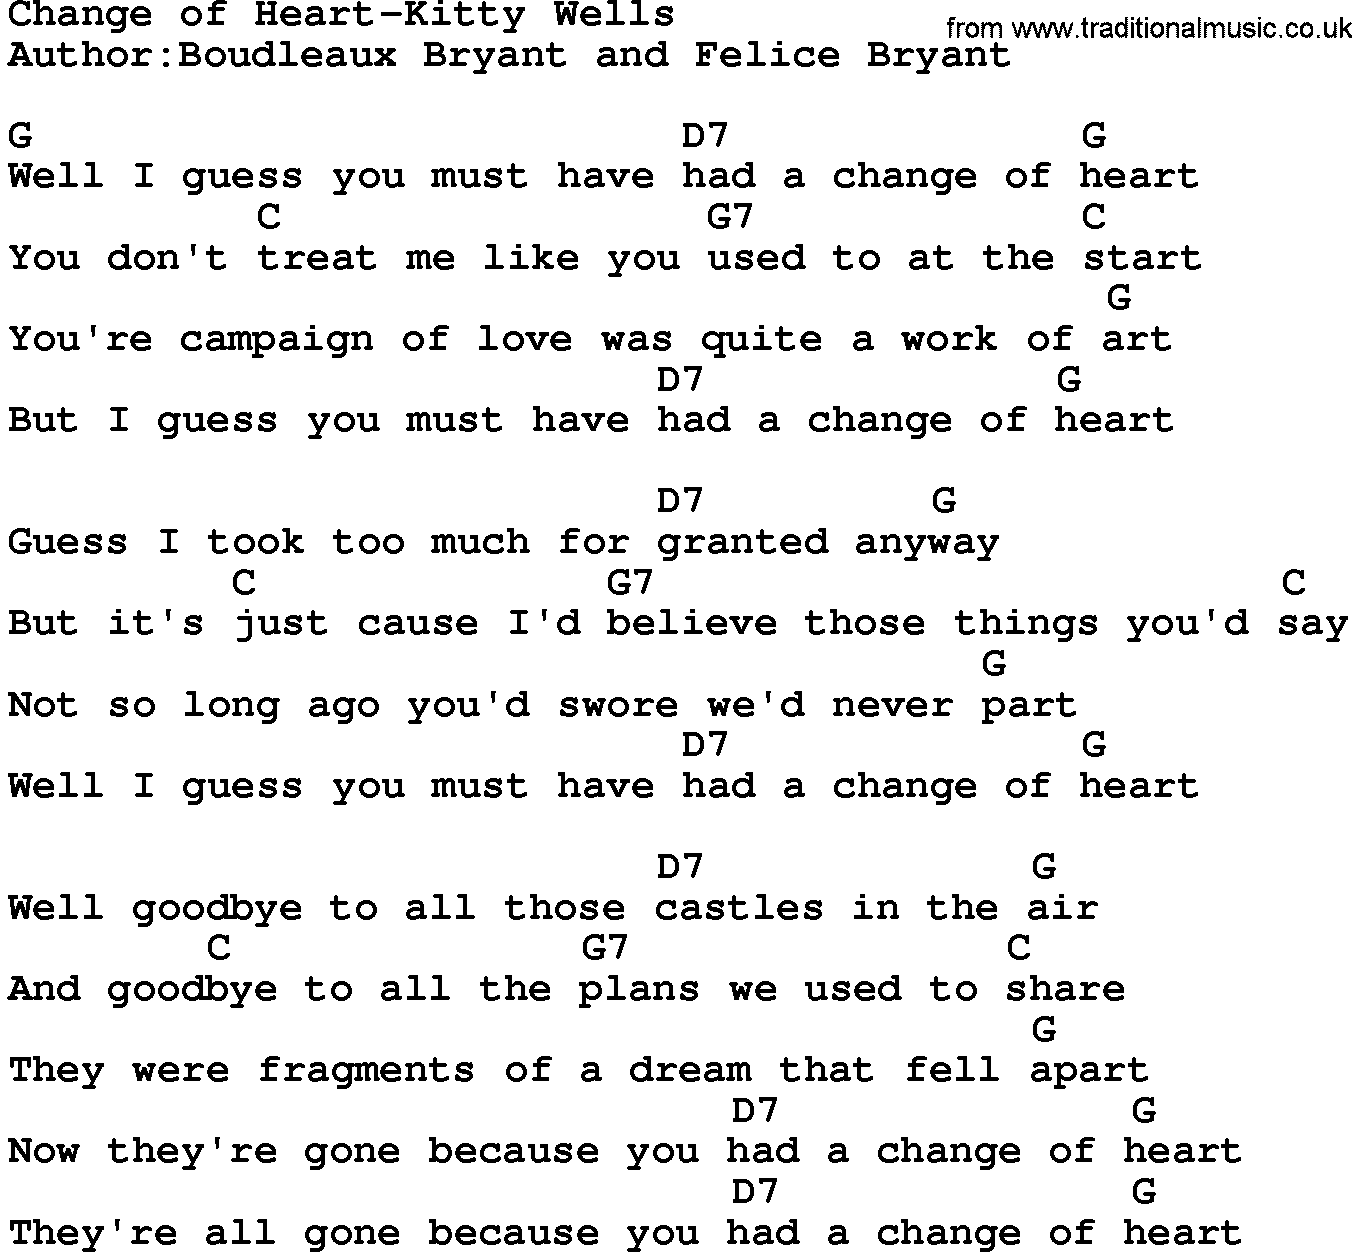 Country music song: Change Of Heart-Kitty Wells lyrics and chords